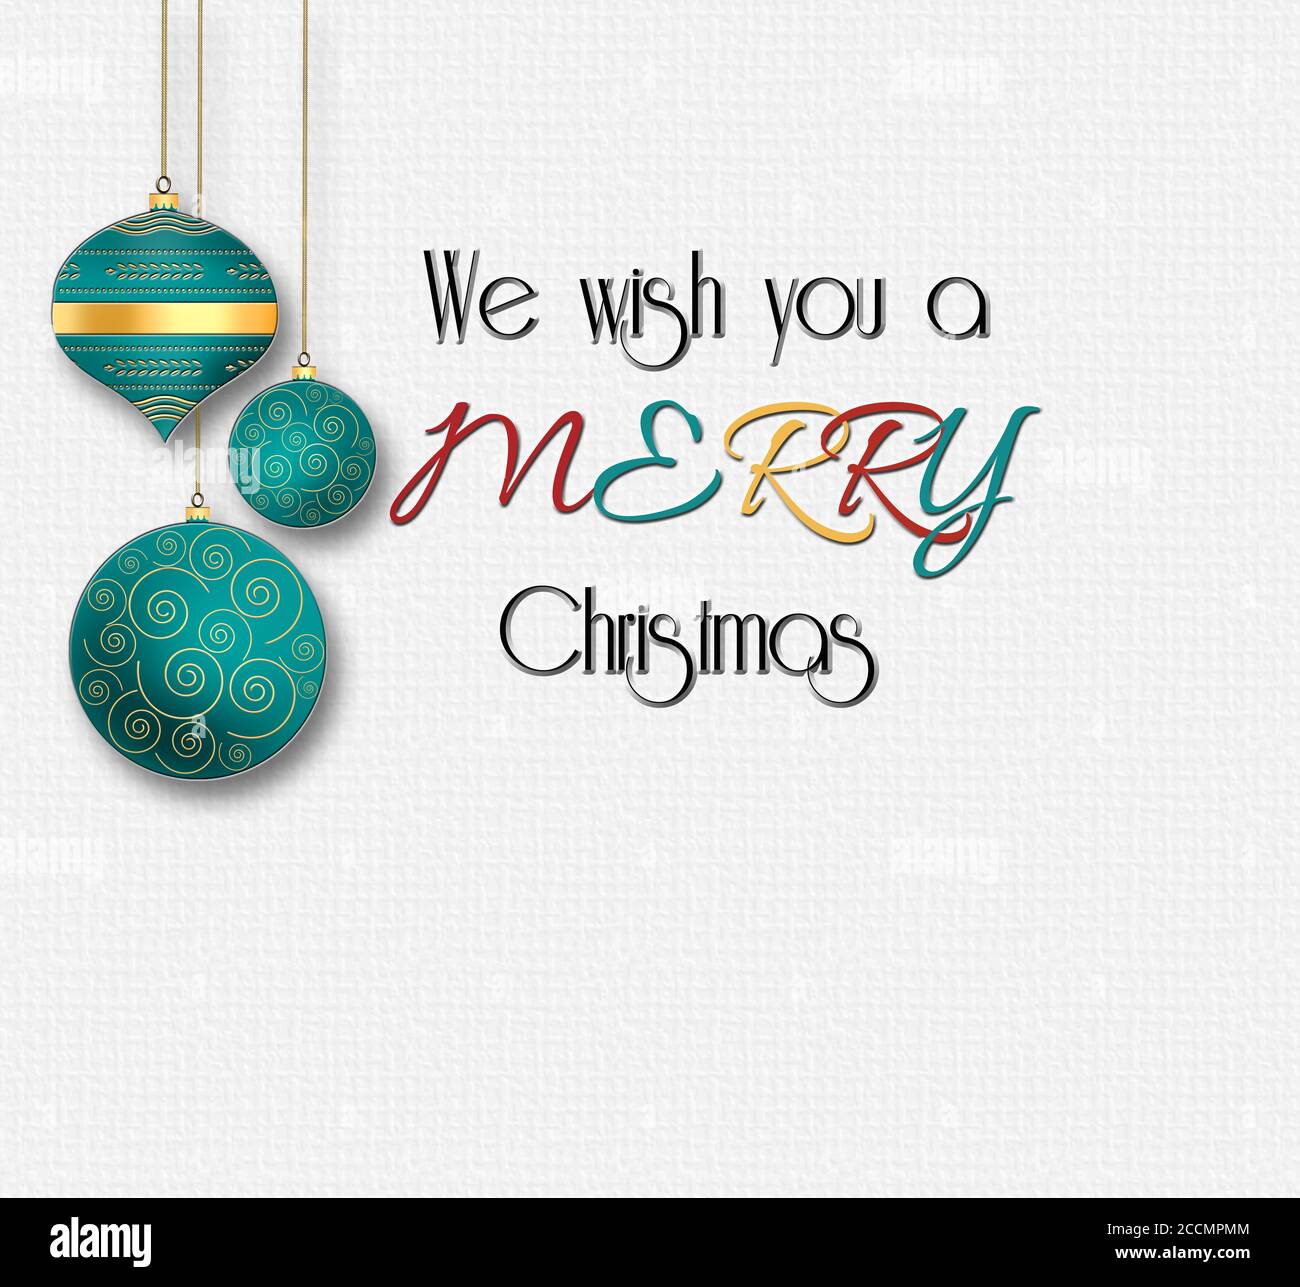 Minimalist Christmas wishes card with text We Wish You a Merry Christmas  with hanging turquoise blue balls on white background and gold frames. 3D  ill Stock Photo - Alamy